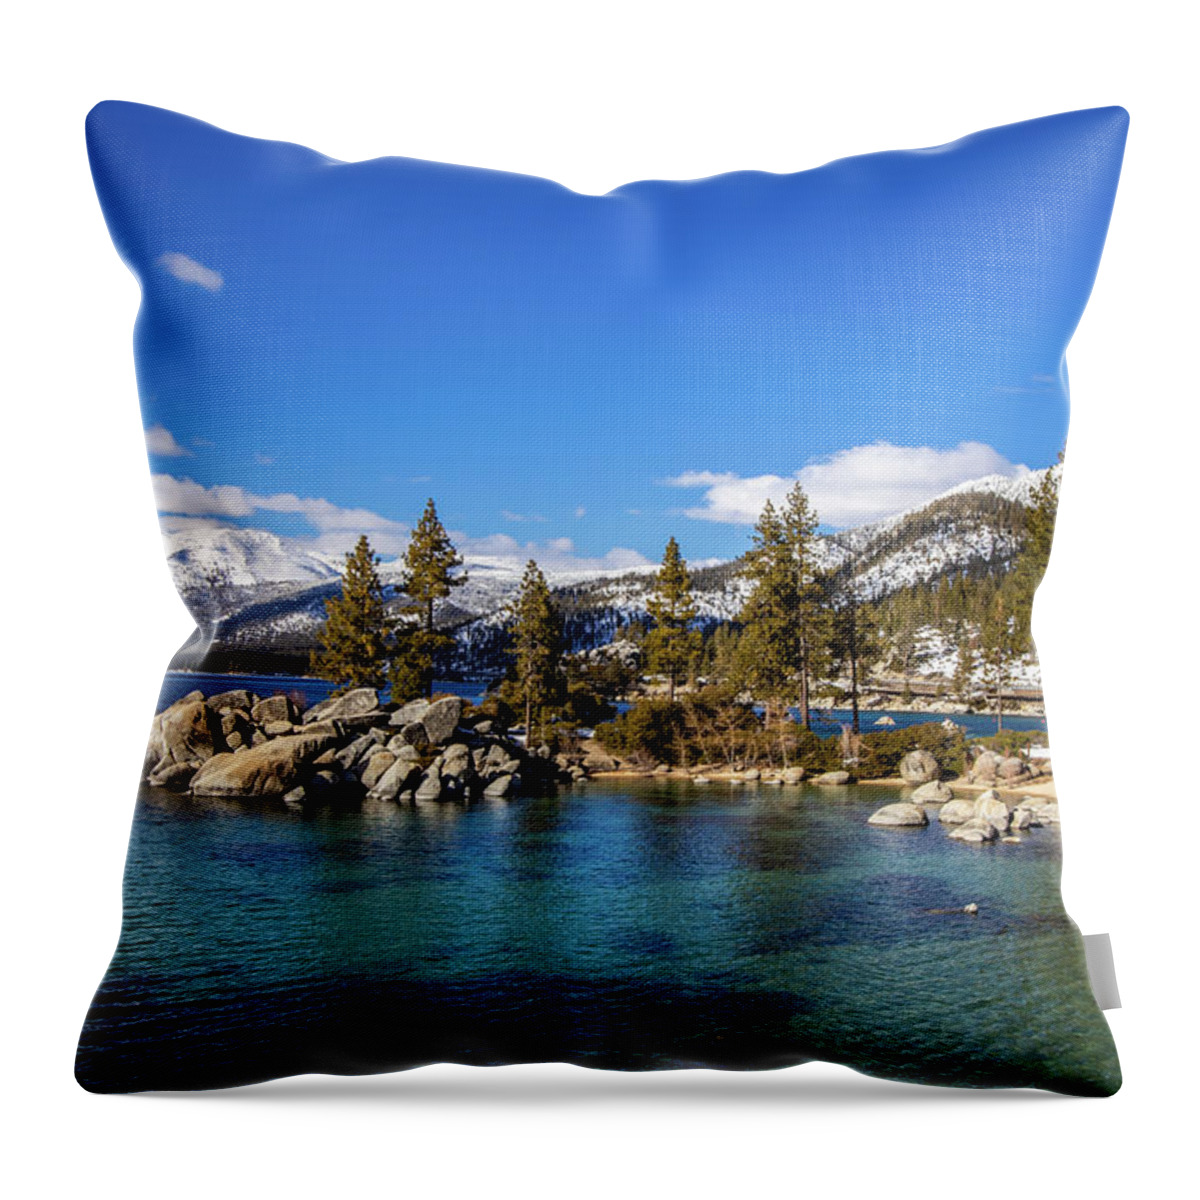 Lake Tahoe Water Throw Pillow featuring the photograph Lake Tahoe 5 by Rocco Silvestri